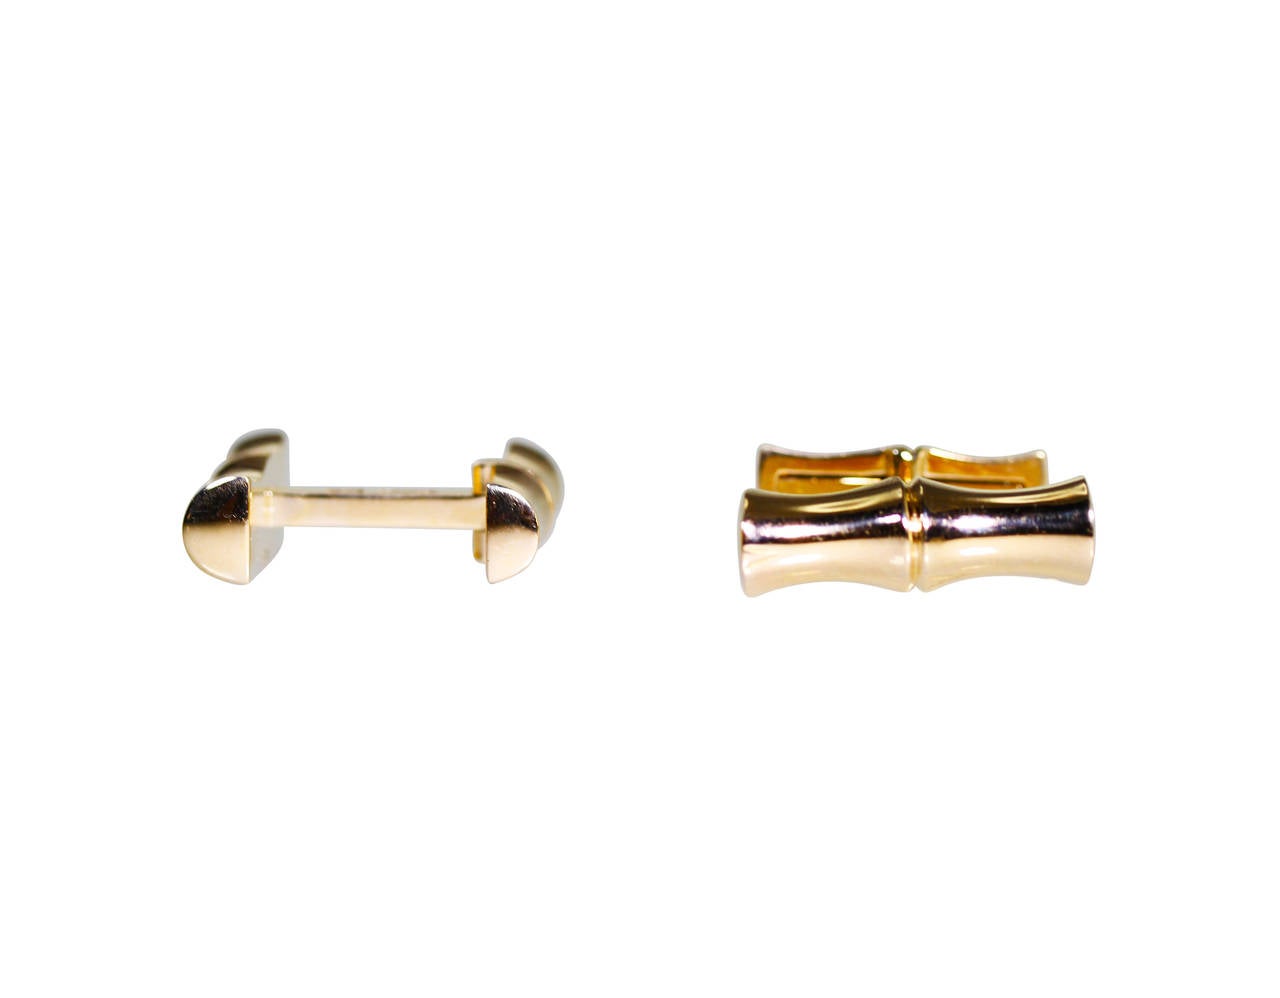 A pair of 14 karat yellow gold bamboo cufflinks by Tiffany & Co., the terminals designed as polished gold bamboo pieces, gross weight 14.3 grams, measuring approximately 7/8 by 1/4 by 7/8 inches, signed Tiffany & Co, stamped 14K.